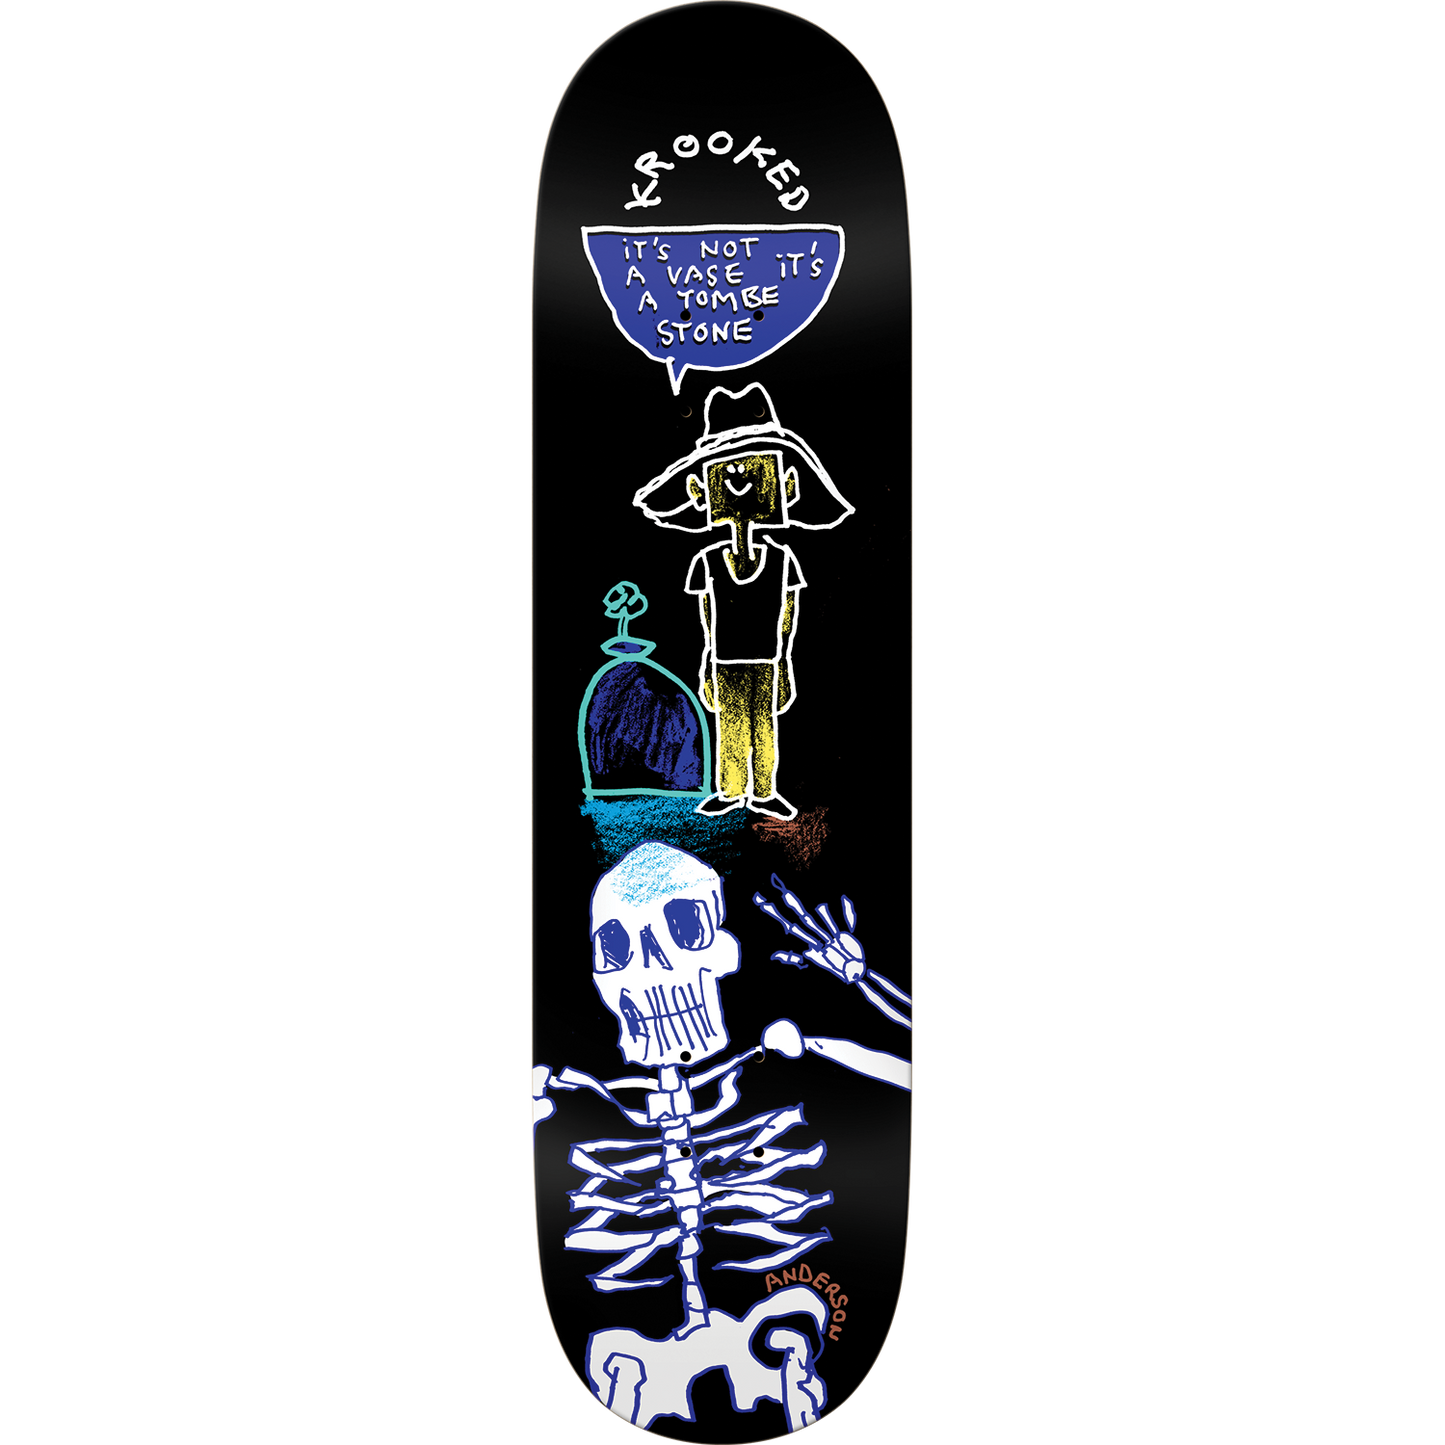 Krooked Anderson Tombe Stone Skateboard Deck -8.38 DECK ONLY